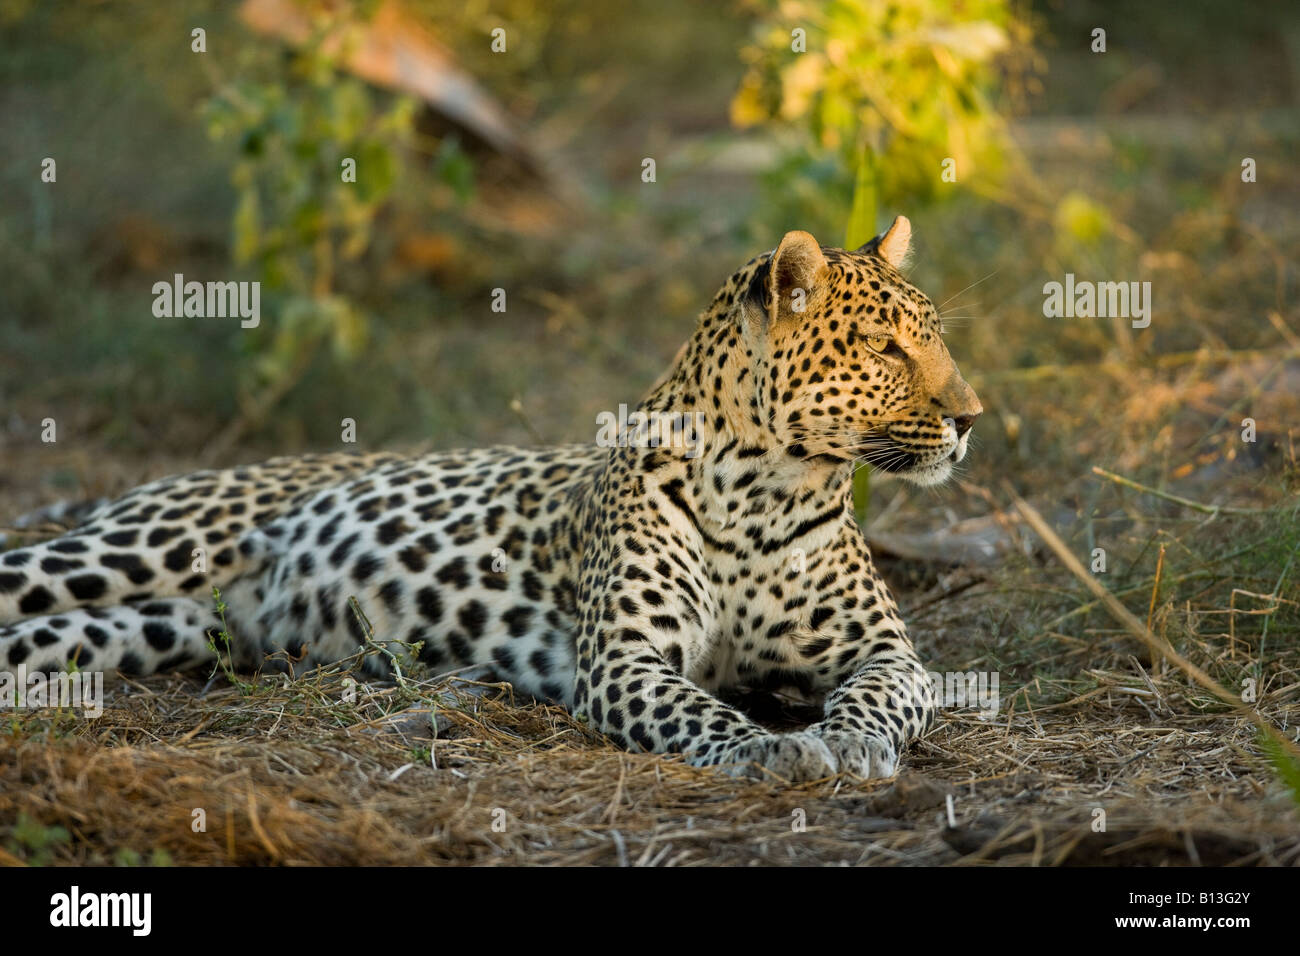 Adult African leopard, Panthera Pardus, lying down in a spot of sunlight alert and watching in Moremi Game Reserve Okavango Delta Botswana Africa Stock Photo